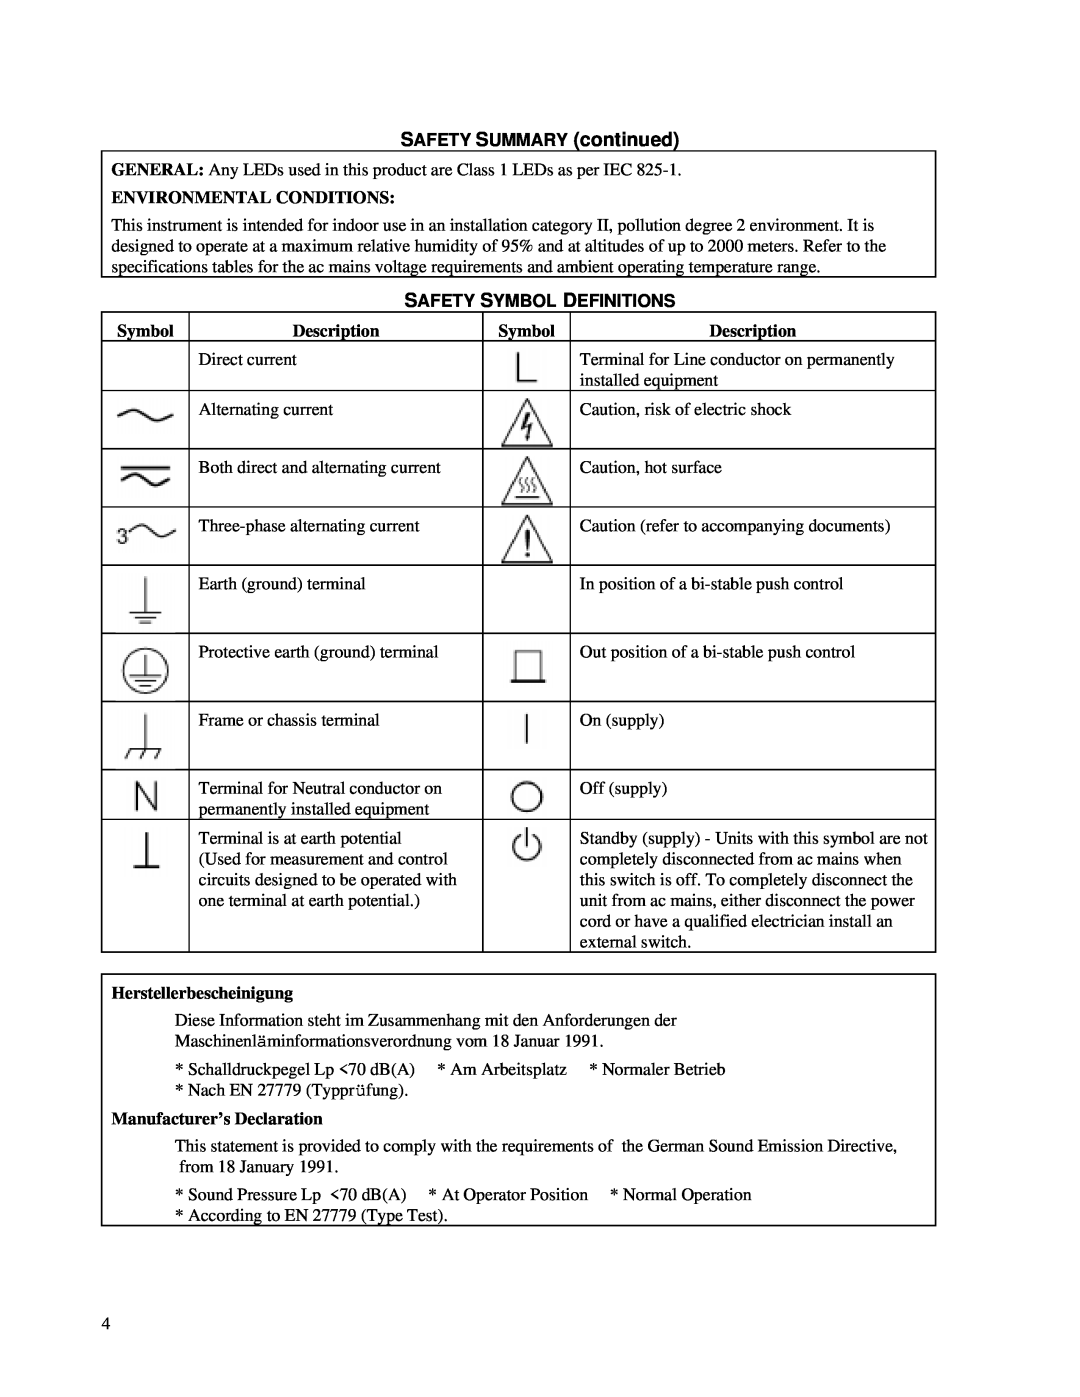 Agilent Technologies 3138A-00101 and above, 66000A manual SAFETY SUMMARY continued, Safety Symbol Definitions 